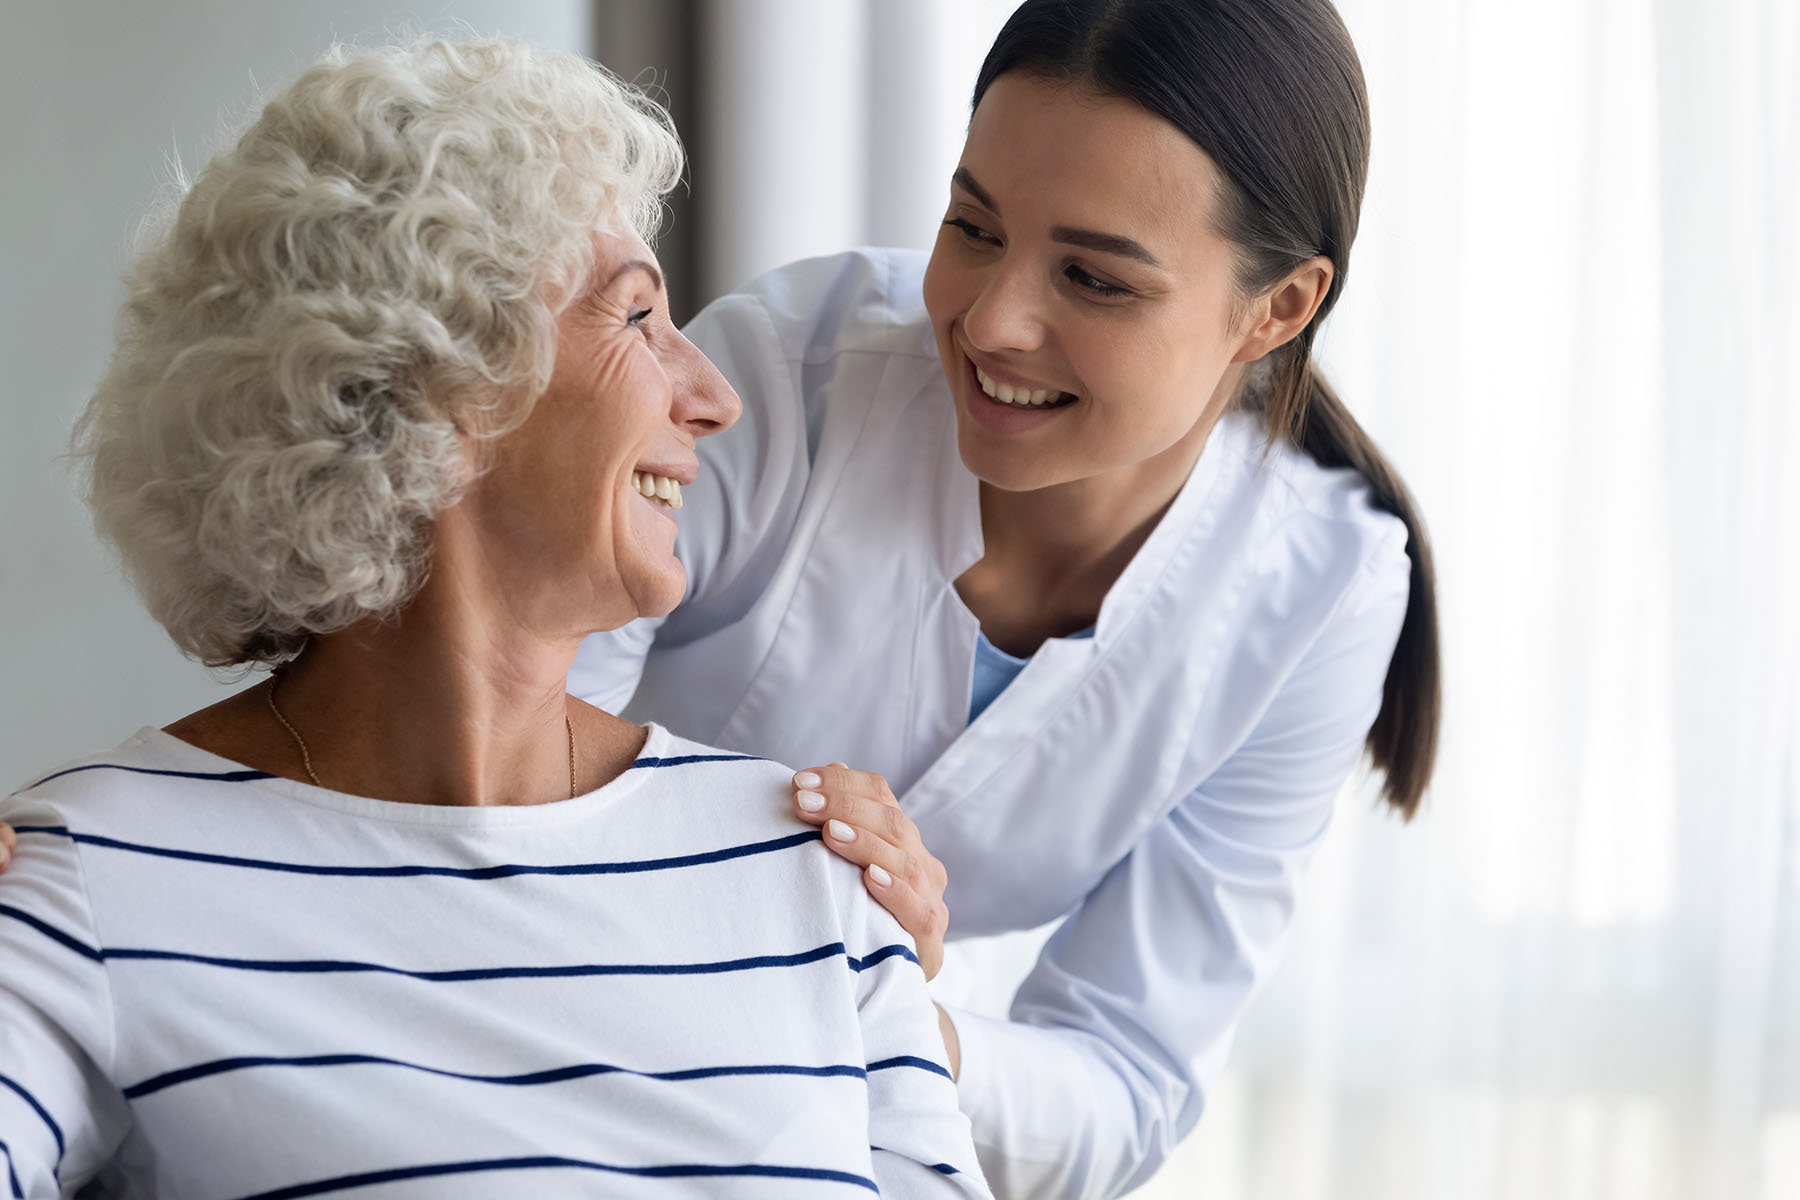 Our award-winning home health care agency offers skilled nursing services